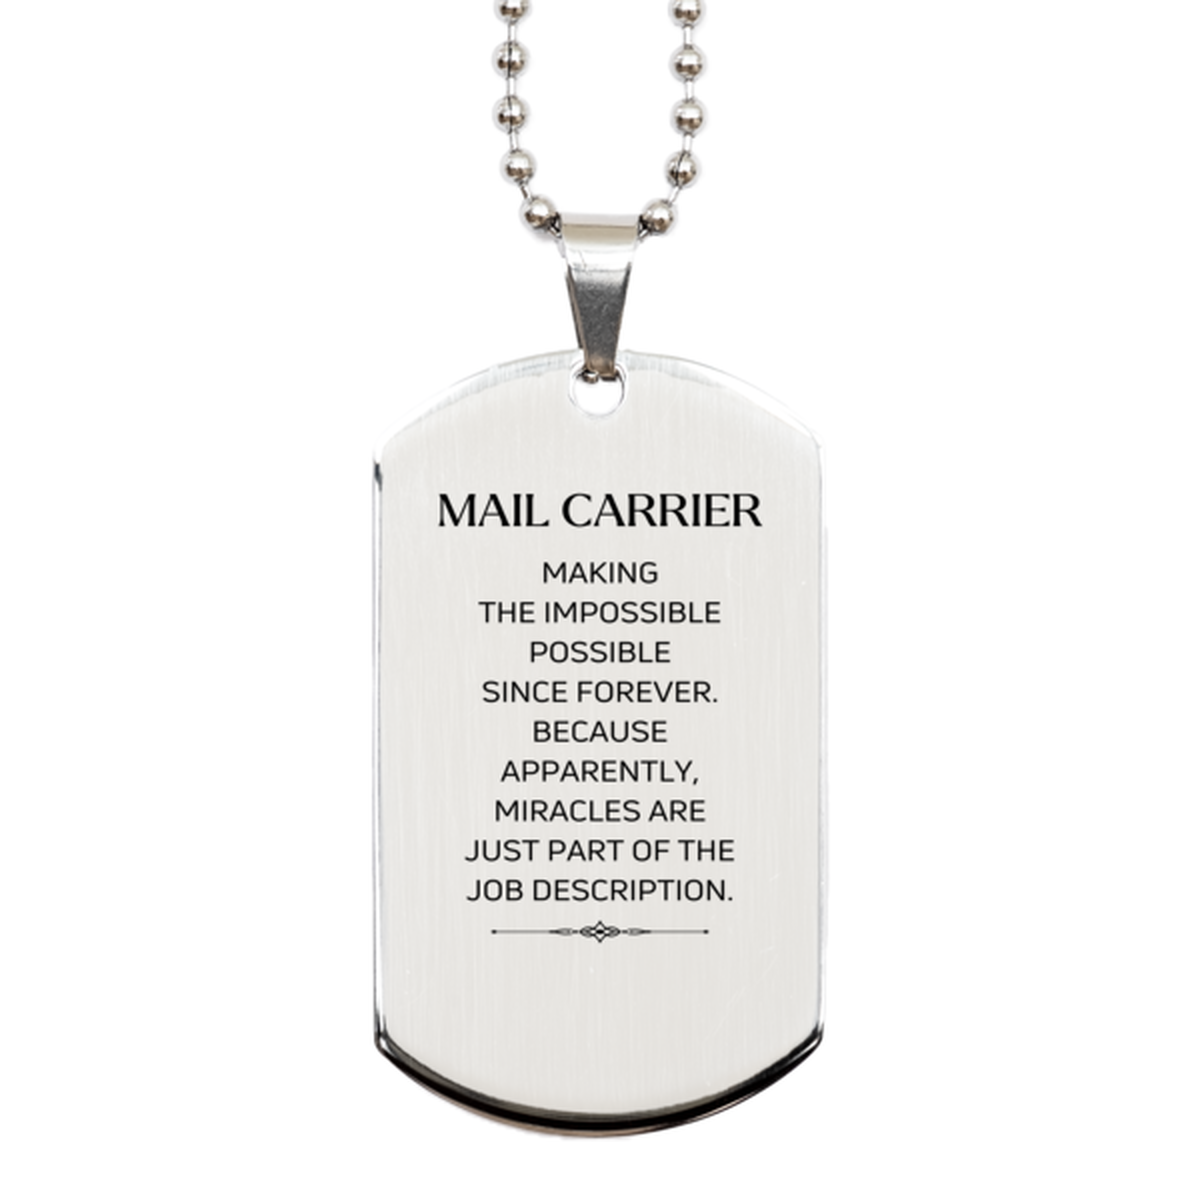 Funny Mail Carrier Gifts, Miracles are just part of the job description, Inspirational Birthday Silver Dog Tag For Mail Carrier, Men, Women, Coworkers, Friends, Boss